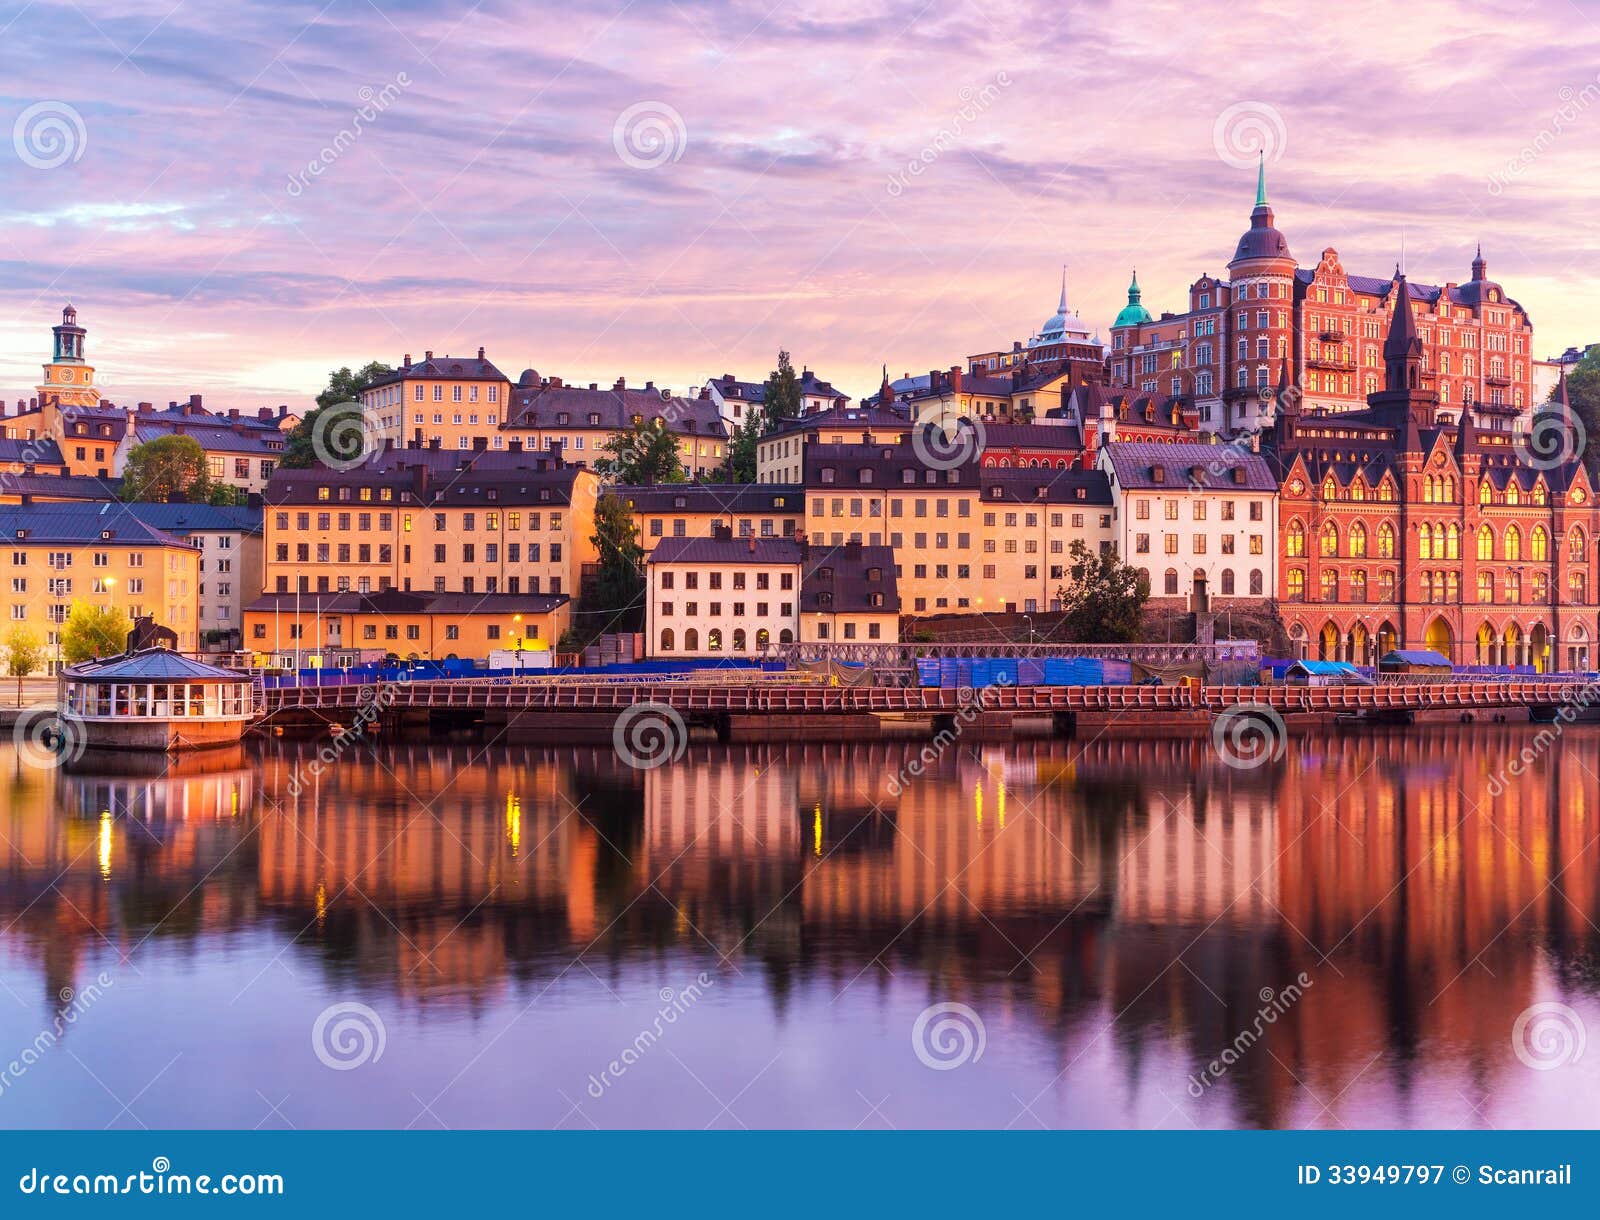 Evening Scenery Of Stockholm Sweden Royalty Free Stock